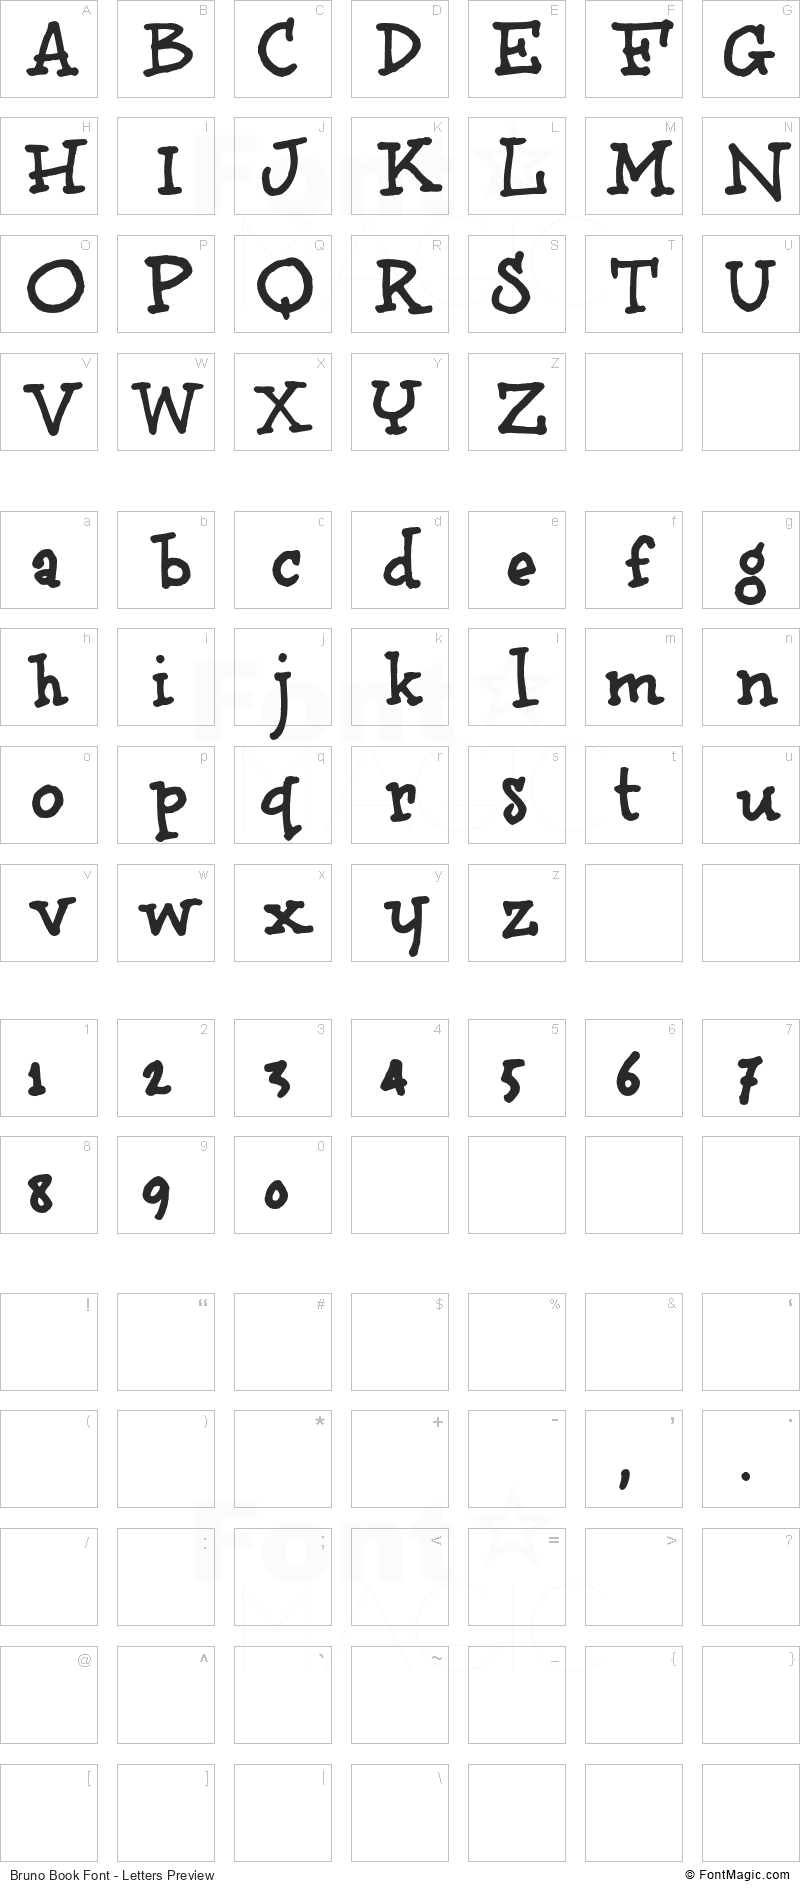 Bruno Book Font - All Latters Preview Chart